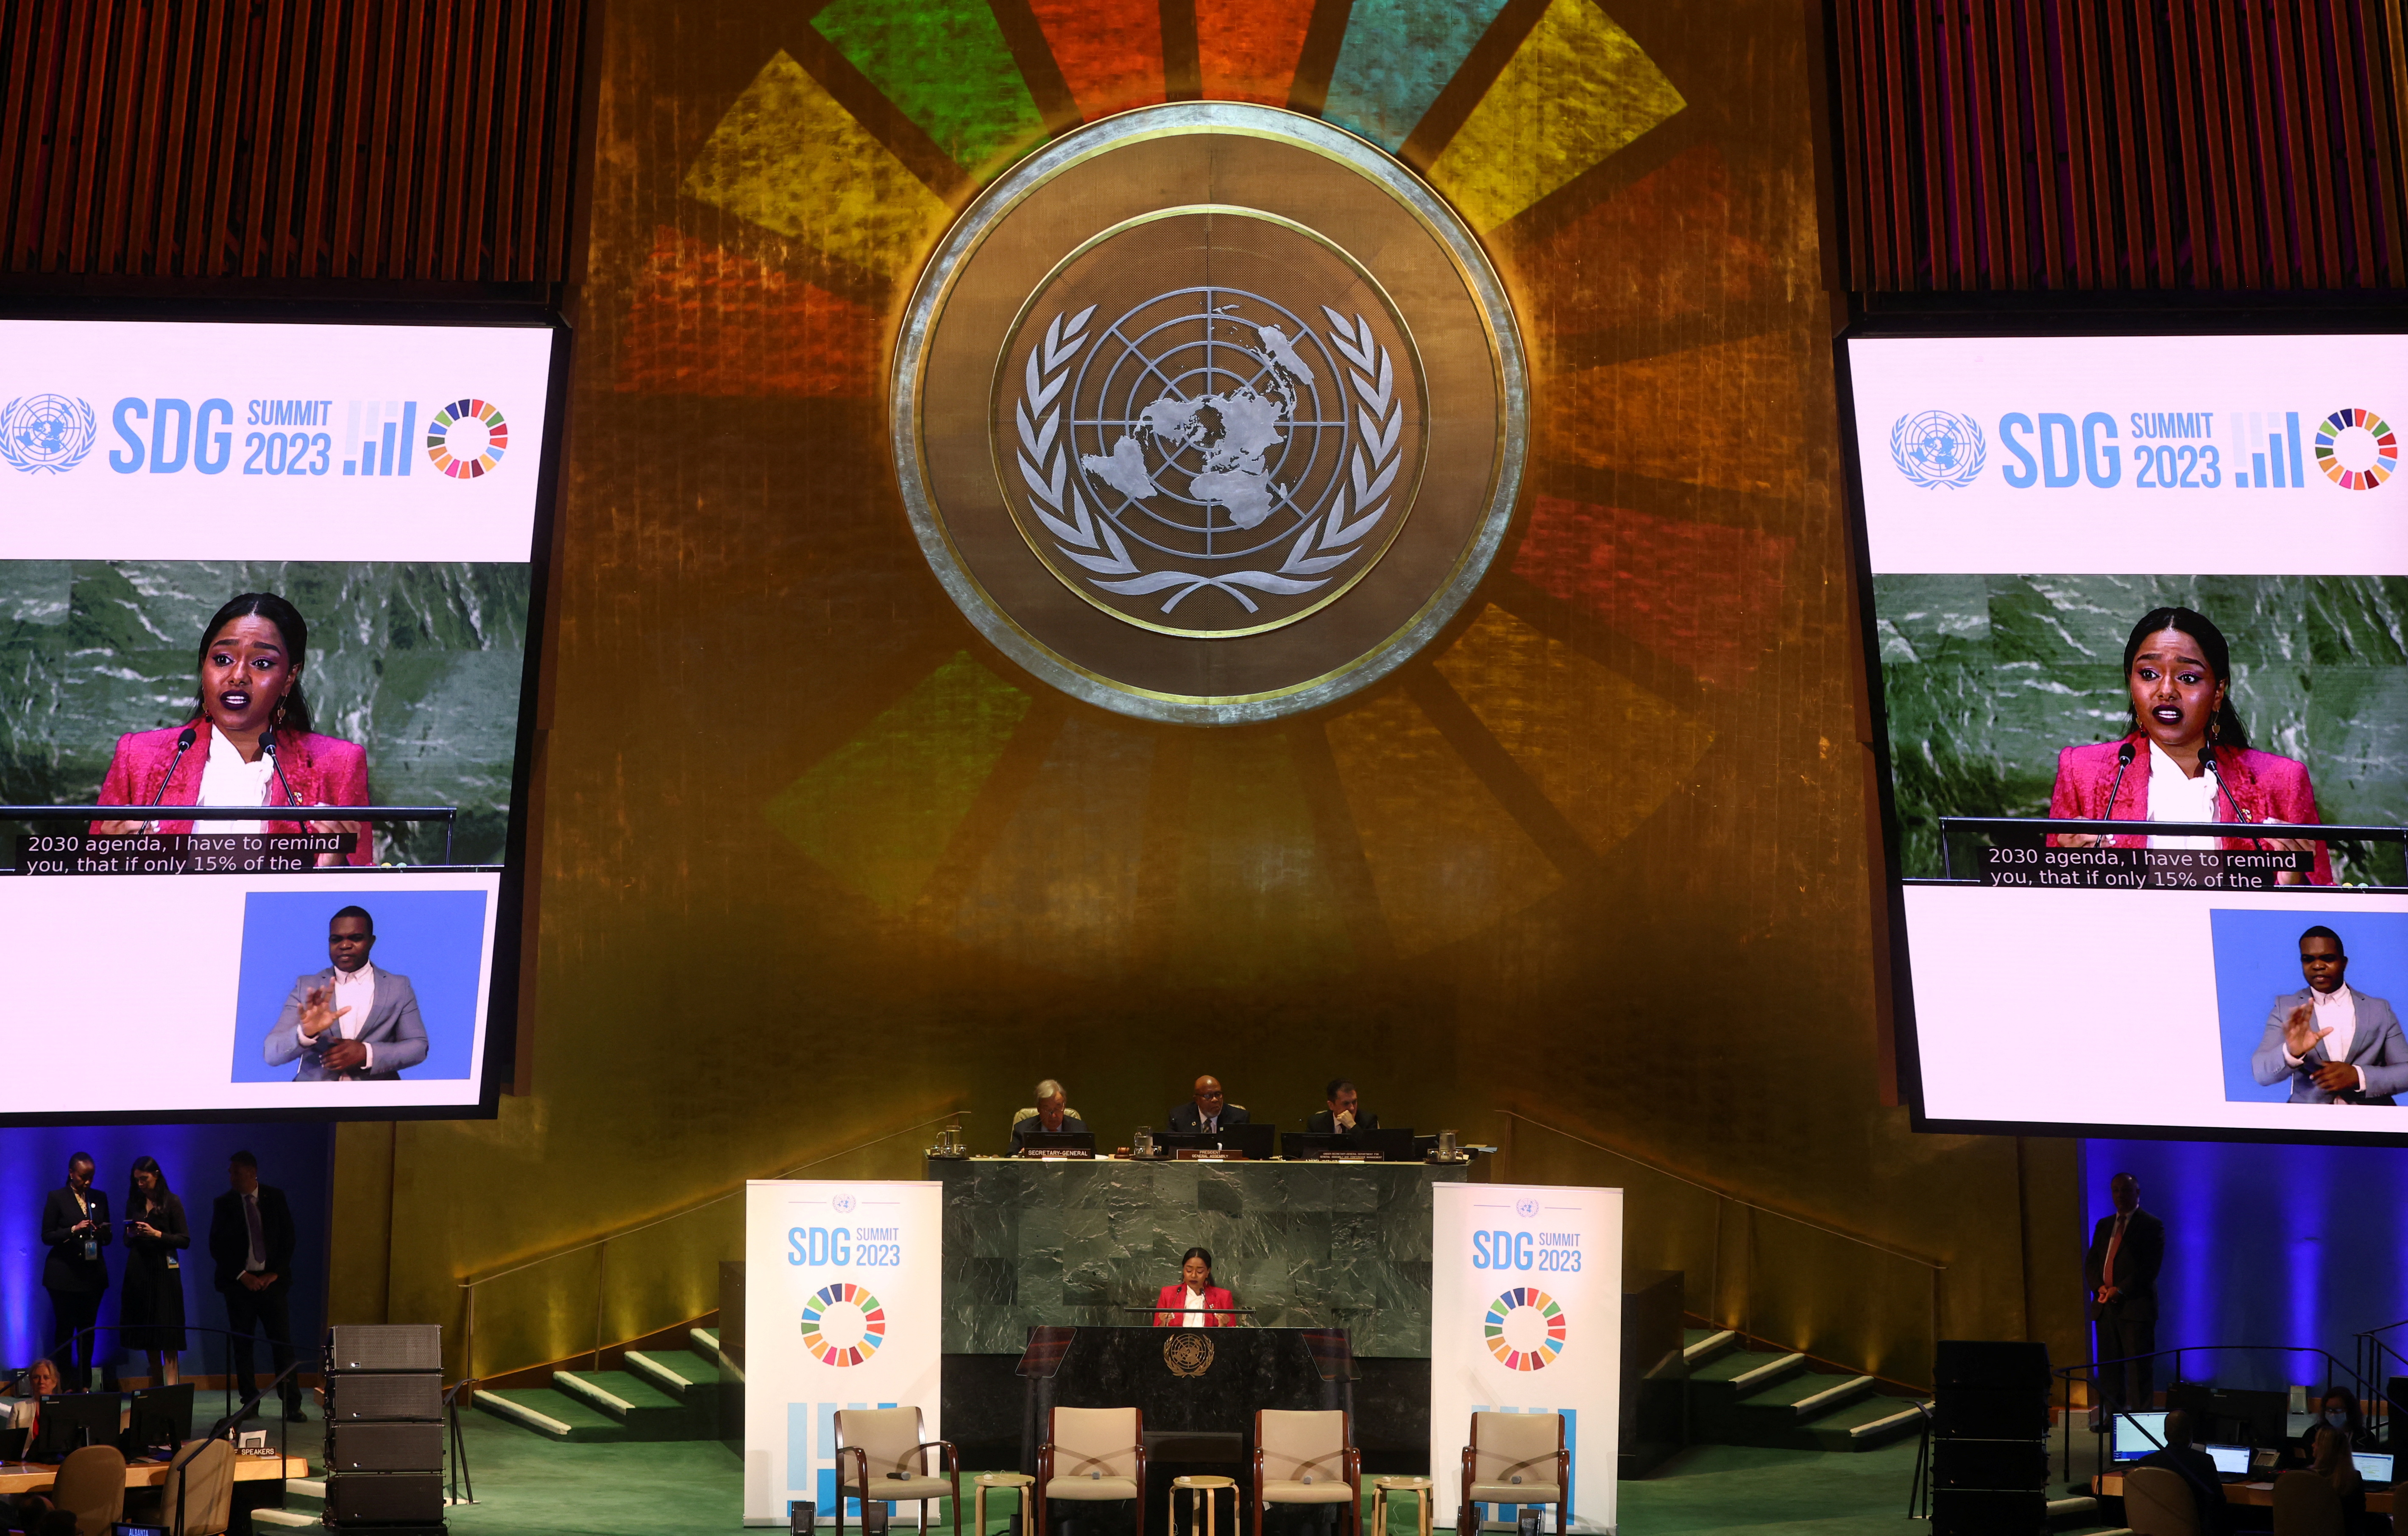 Sustainable Development Goals (SDG) Summit at United Nations headquarters in New York